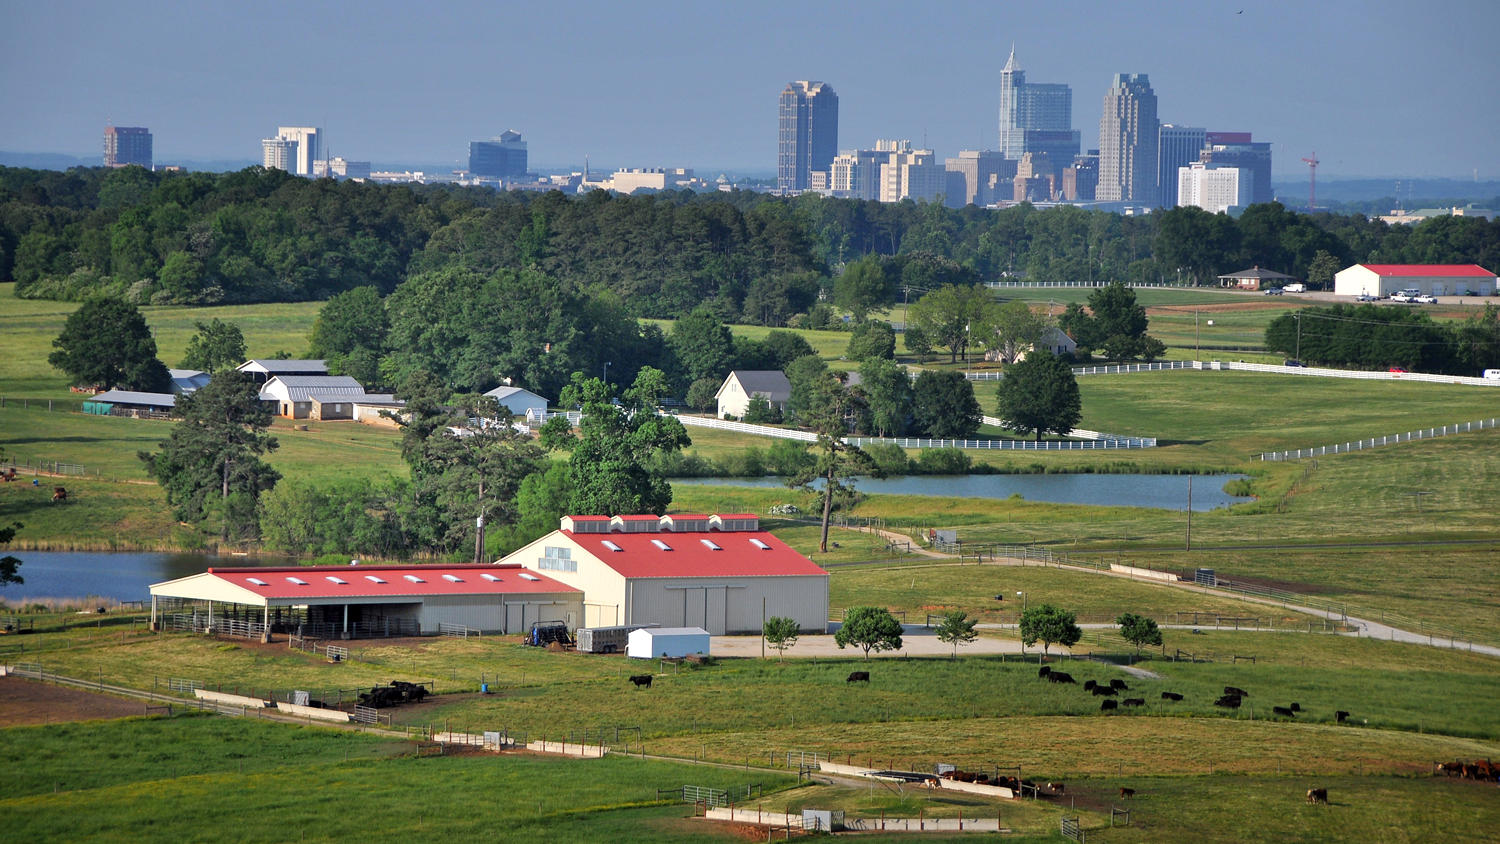 Lake Wheeler farm in foreground, with Raleigh skyline in background